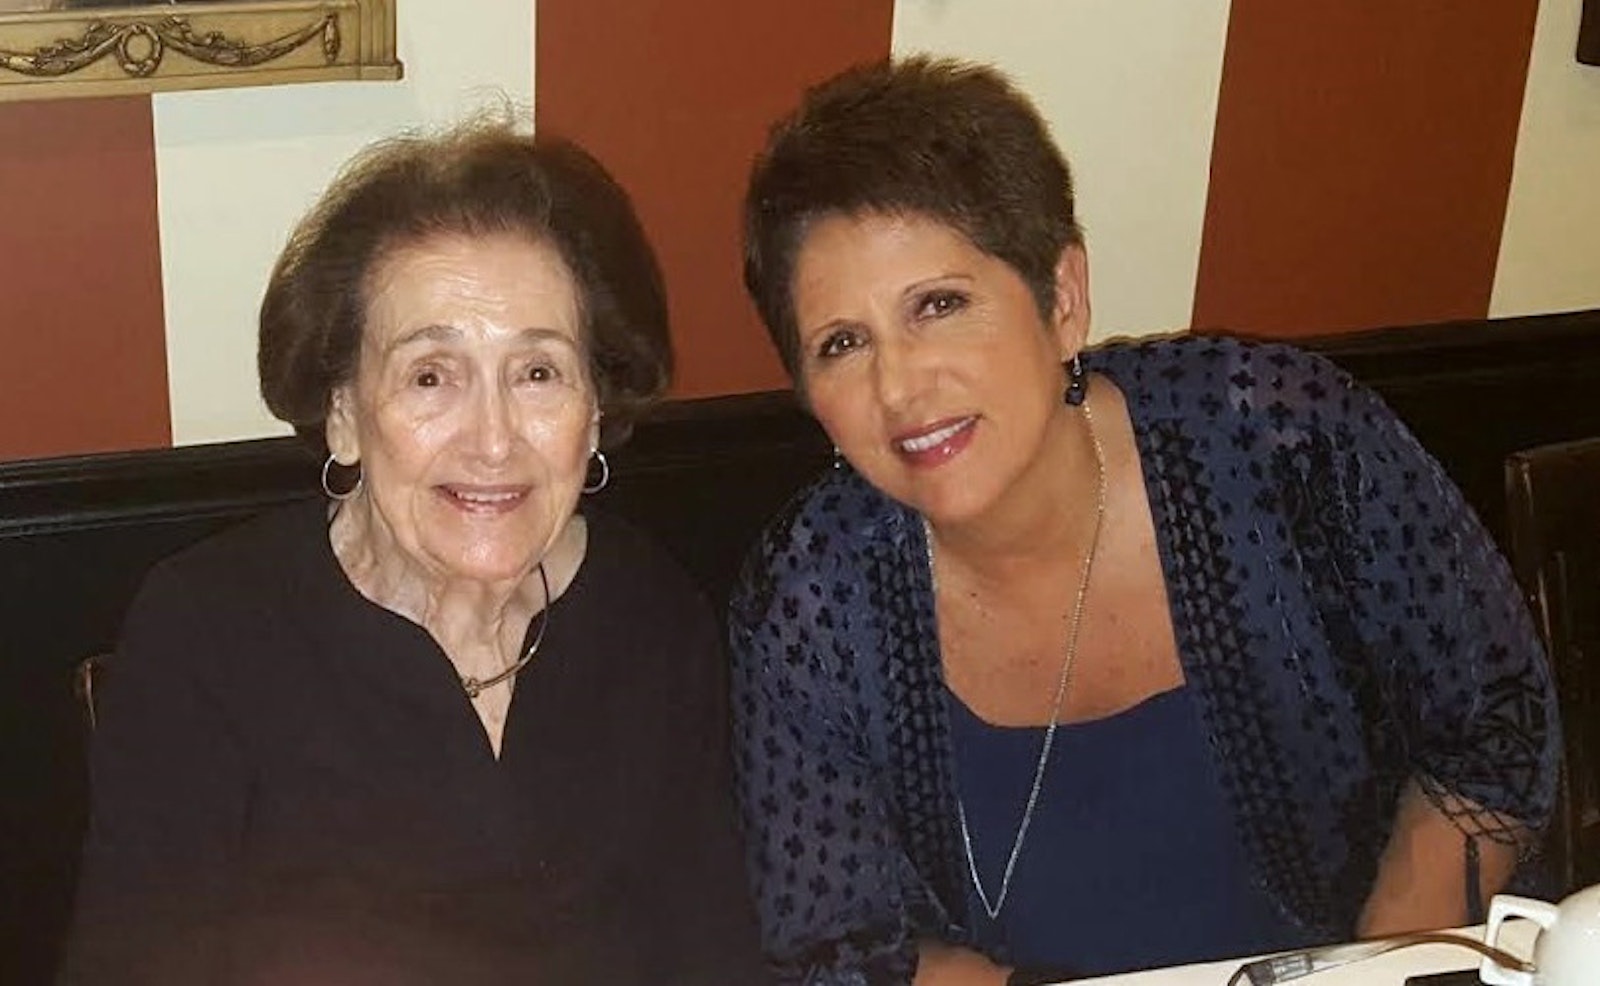 Rose Tomeo Squillace, a native of Jersey City, New Jersey, who lived most of her life in St. Clair Shores, died in March 2020. Teresa Tomeo, her daughter, decided to write the book because “I just felt she didn’t get a proper send off. I wanted to give her a tribute.”